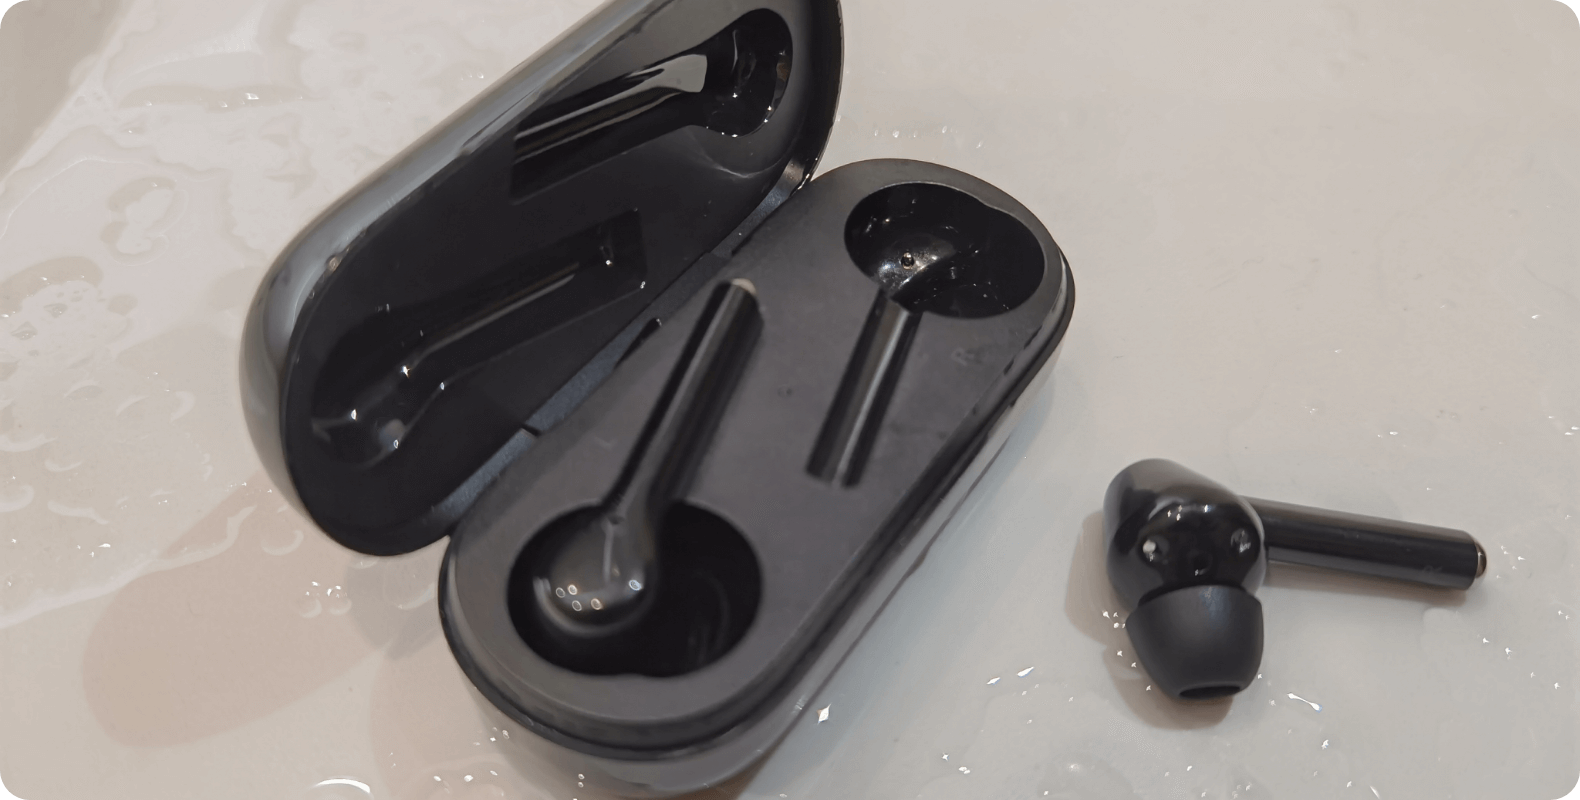 HUAWEI FreeBuds 3i True Wireless Earbuds Have A New Design, Anc And Is Waterproof